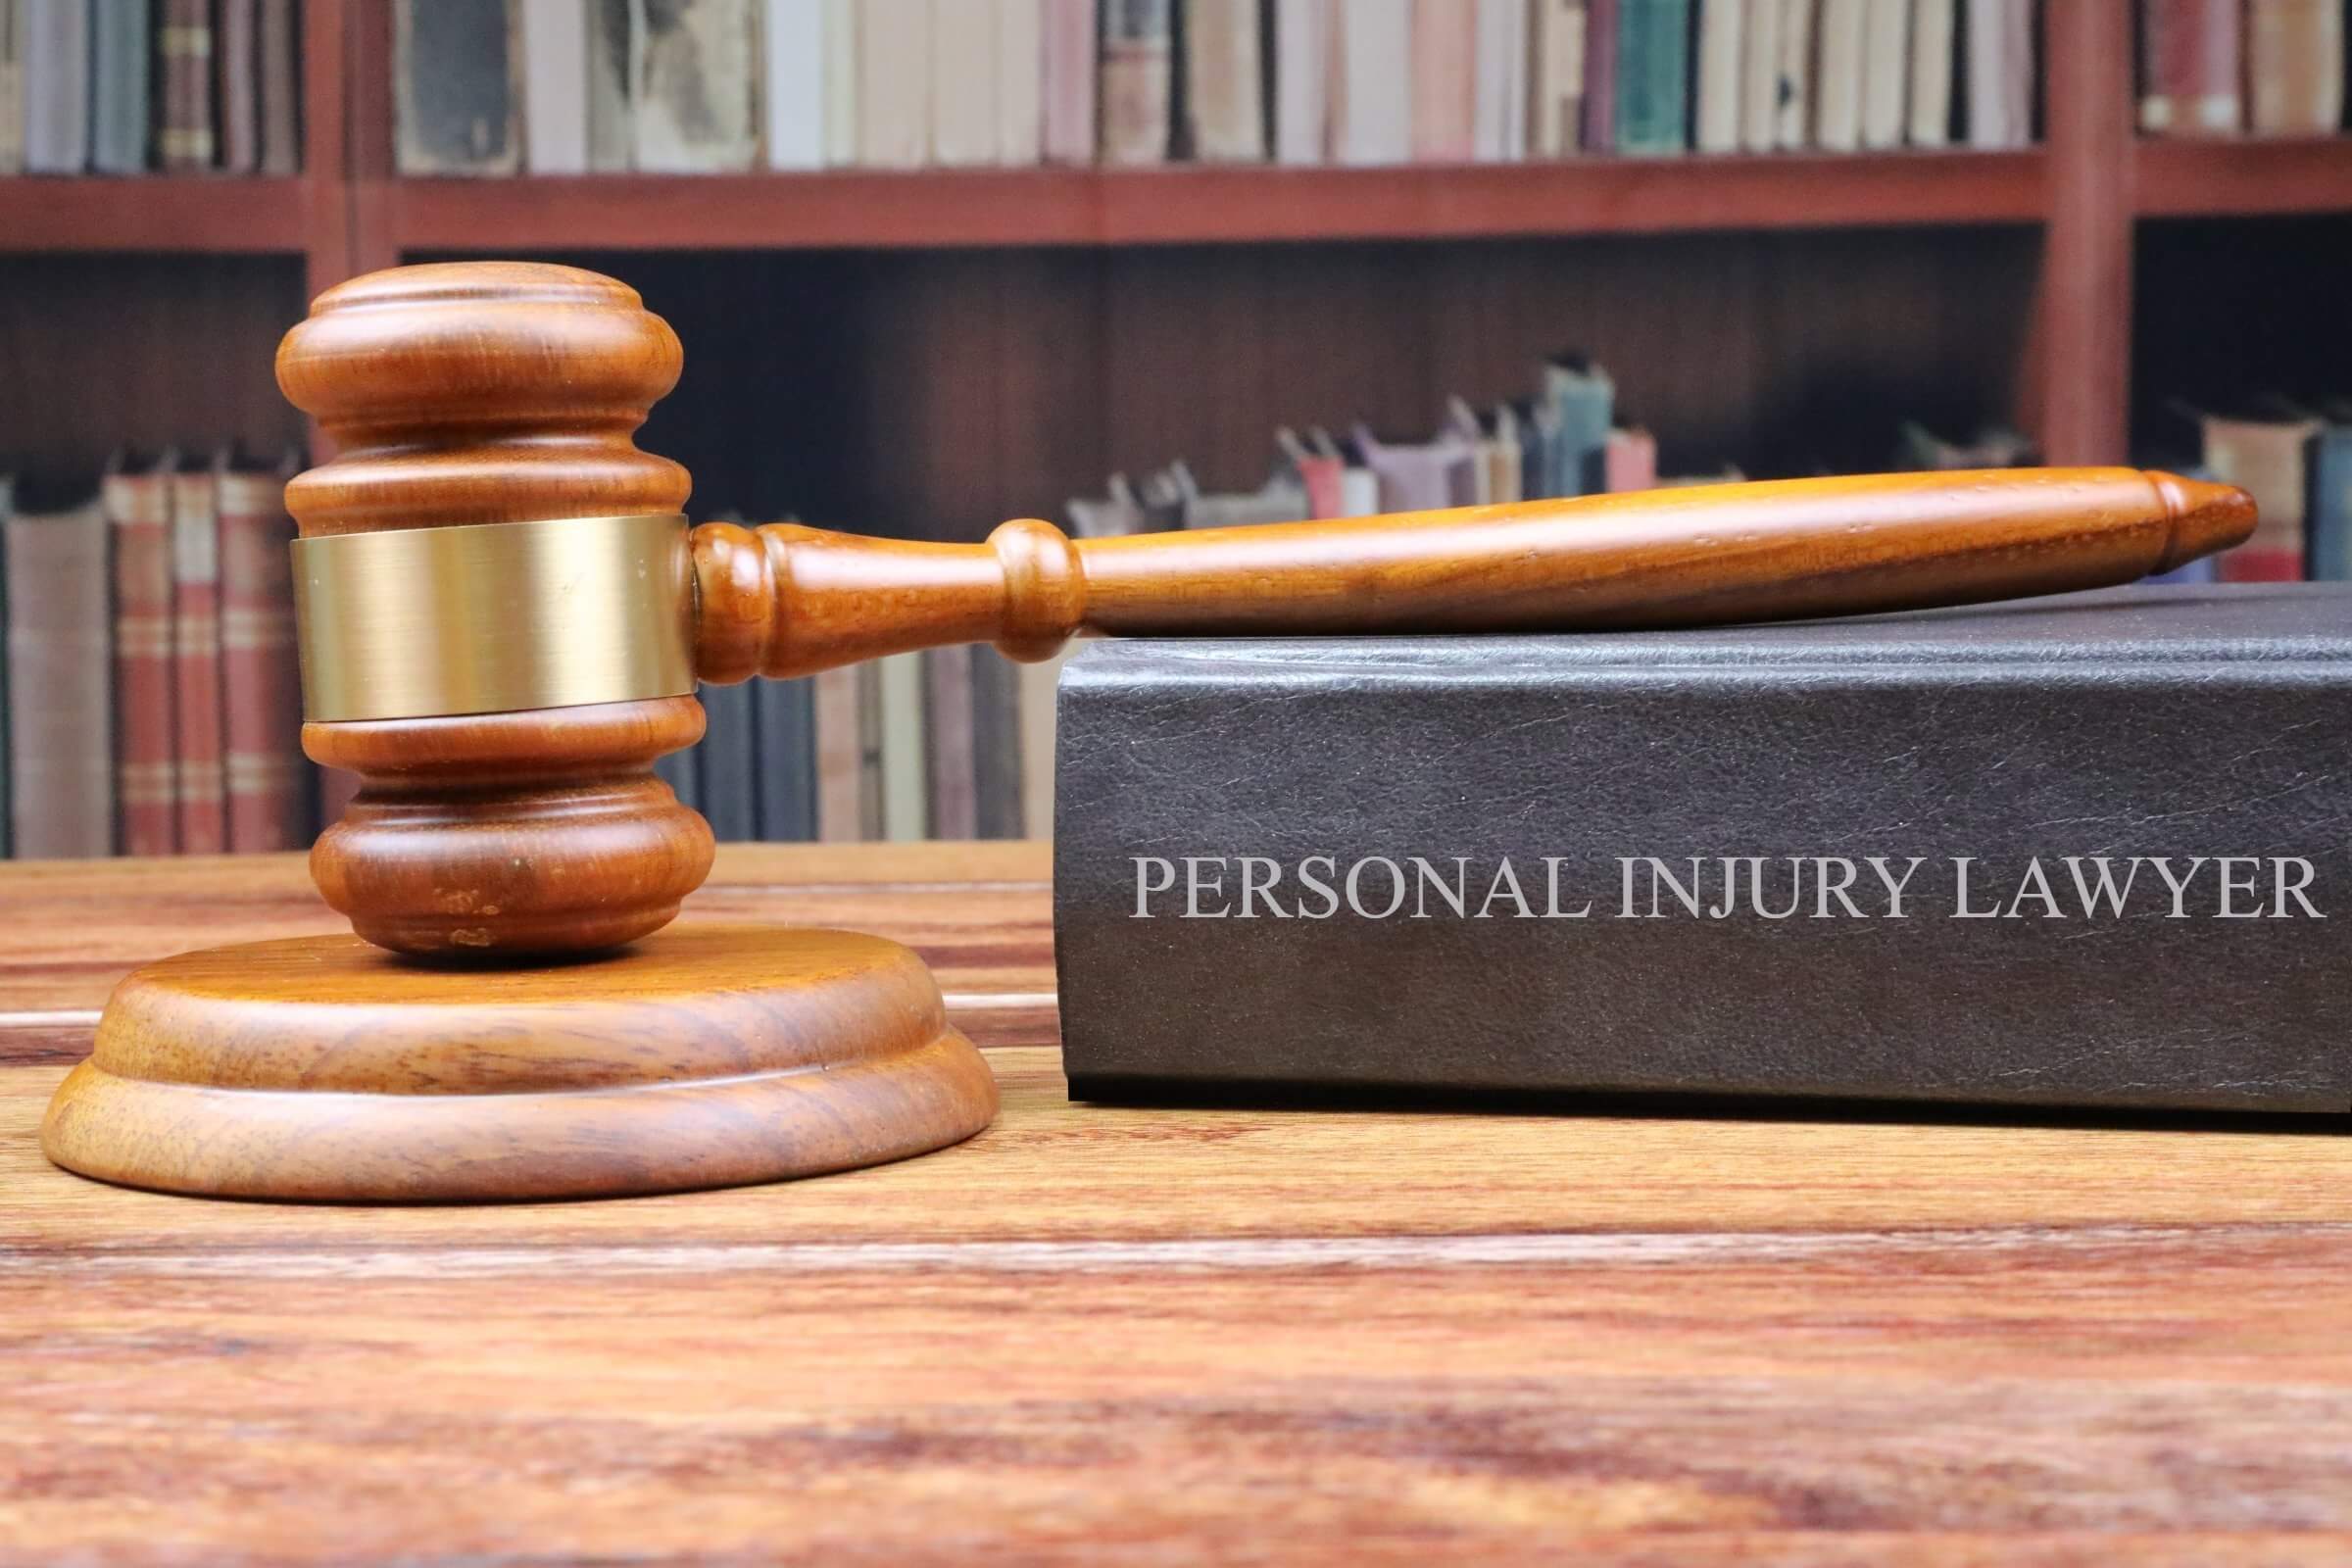 Best Personal Injury Lawyer in New Orleans, Louisiana